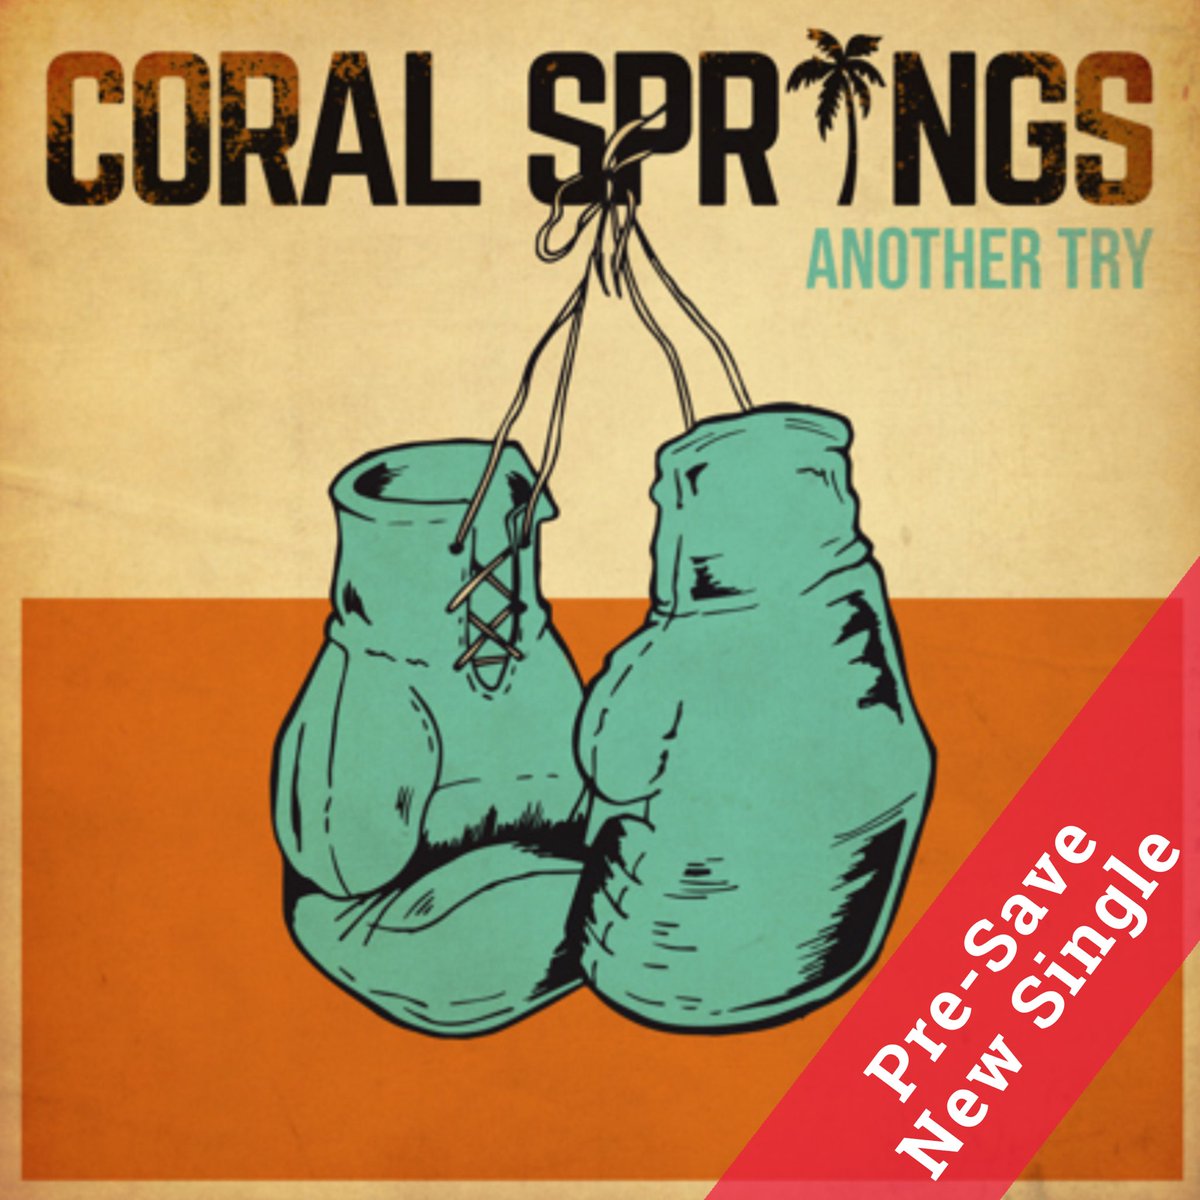 Enjoy new music? 

PRE-SAVE the new @CoralSpringsNL single ‘Another Try’ & next week your new music dreams will come true 🤘

coralsprings.lnk.to/anothertry

#coralsprings #newsong #lockjawrecords #lockjawcrew #poppunk #skatepunk #newmusic #outnow #netherlands #westcoast